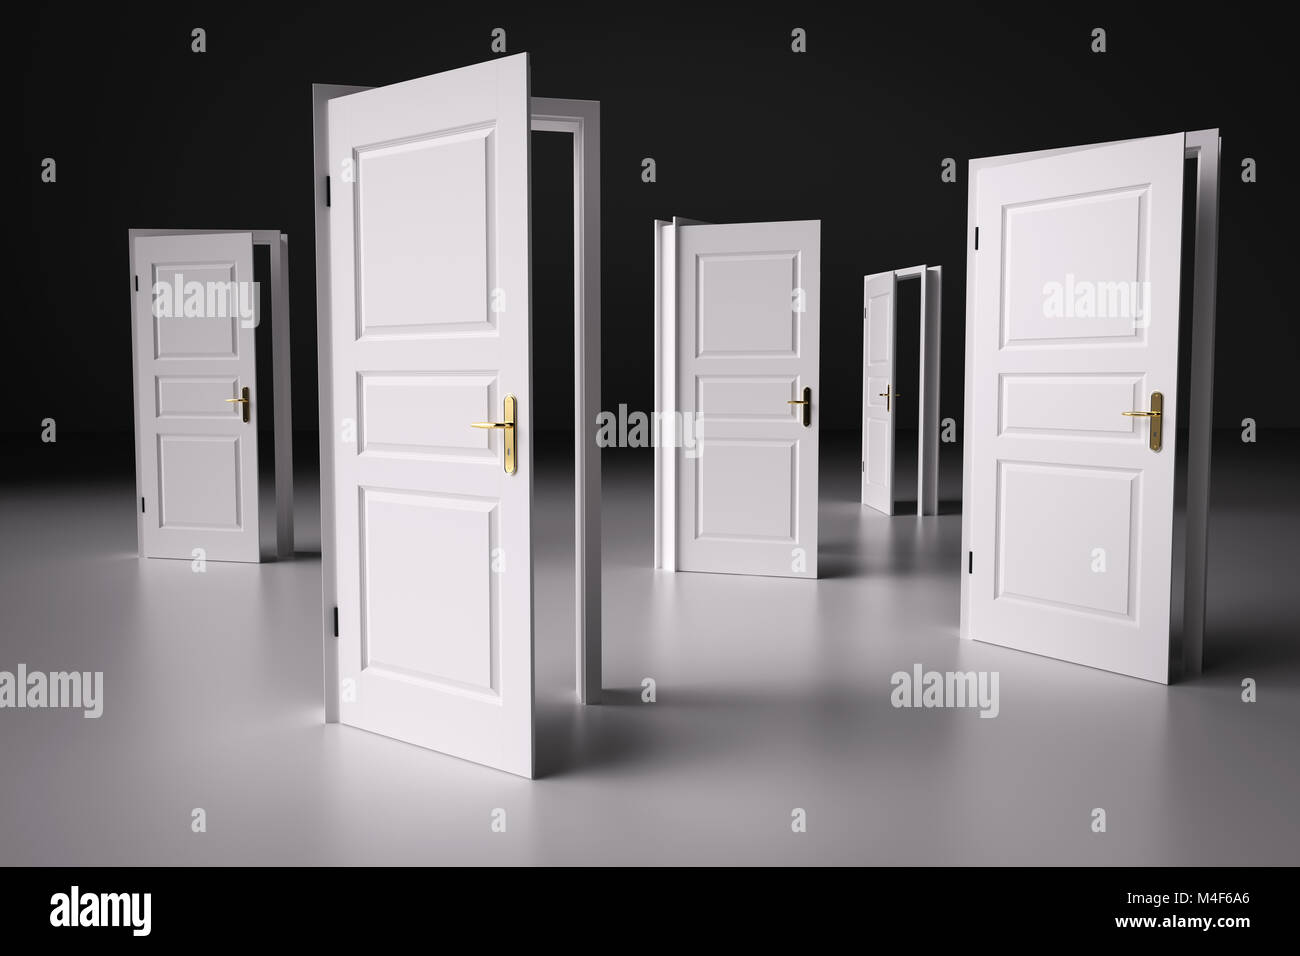 Many ways to choose from, open doors. Decision making Stock Photo